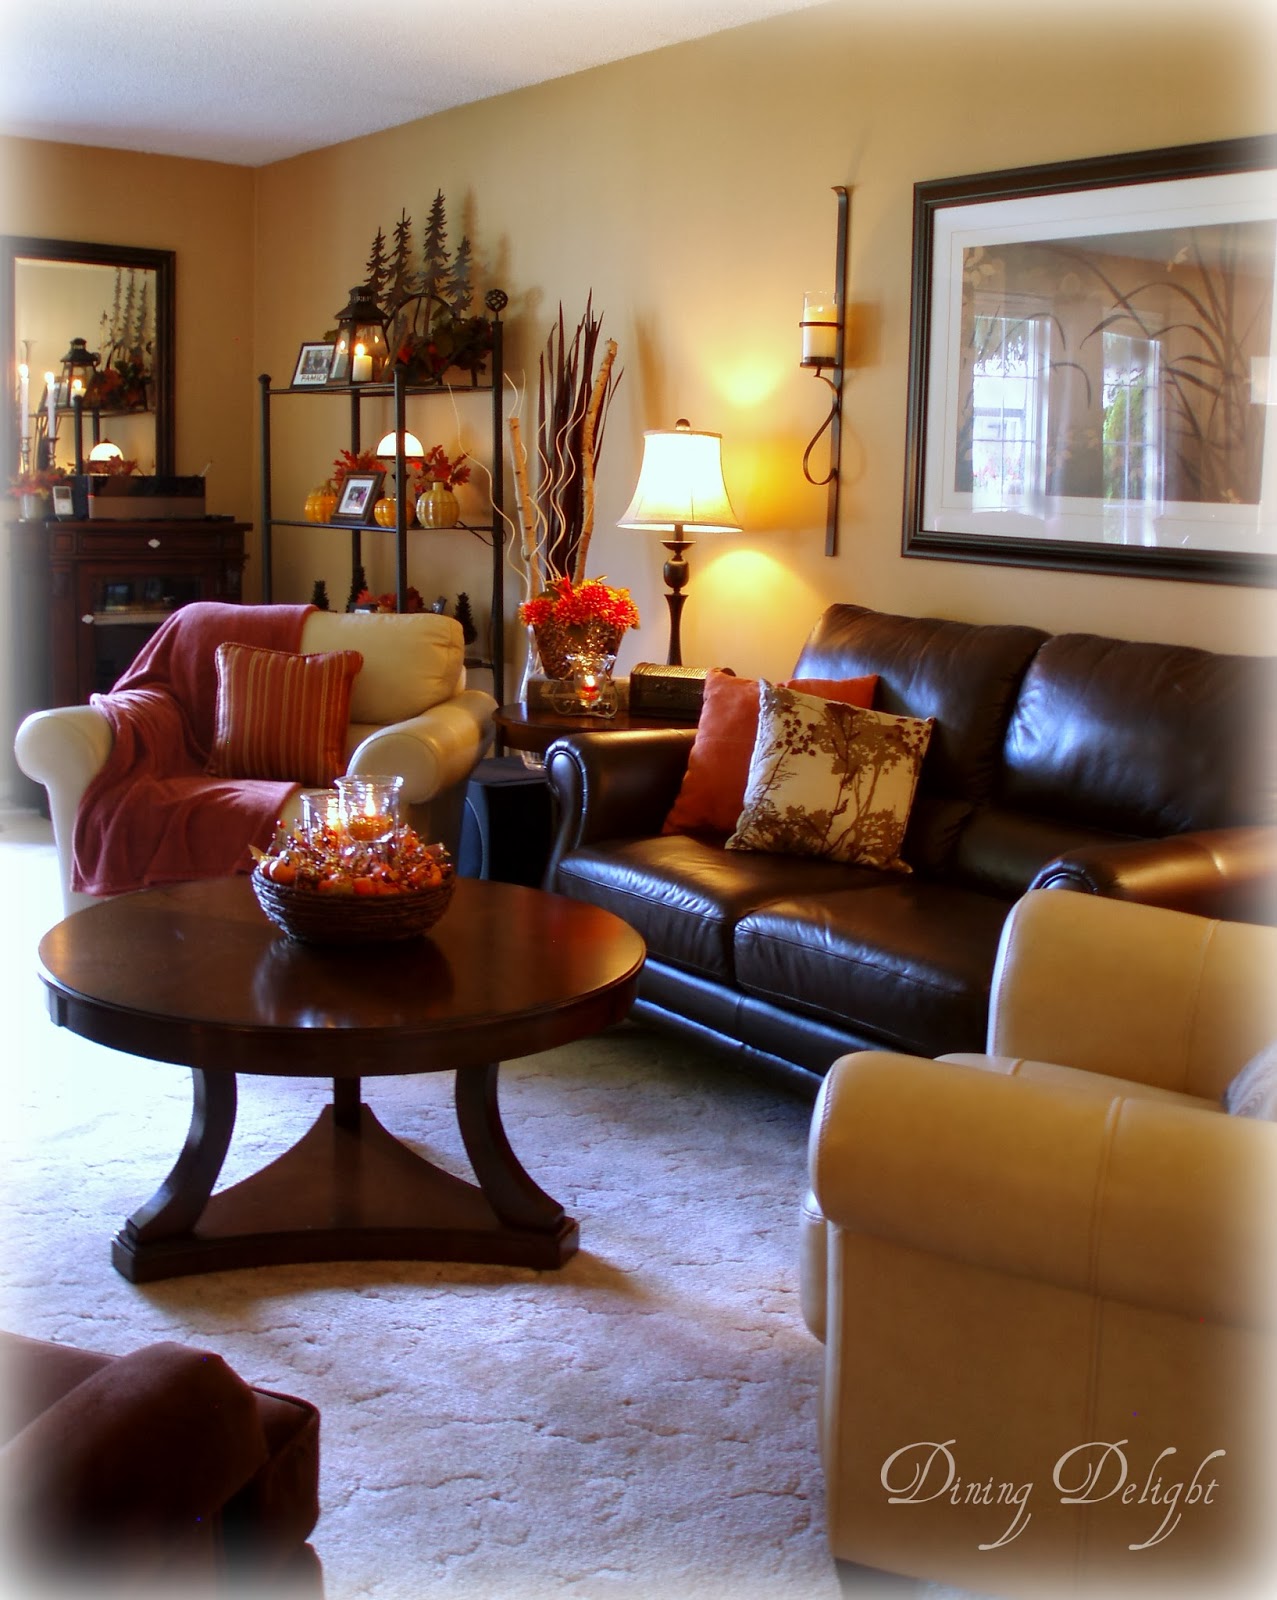 Dining Delight: Living Room in Fall Colours